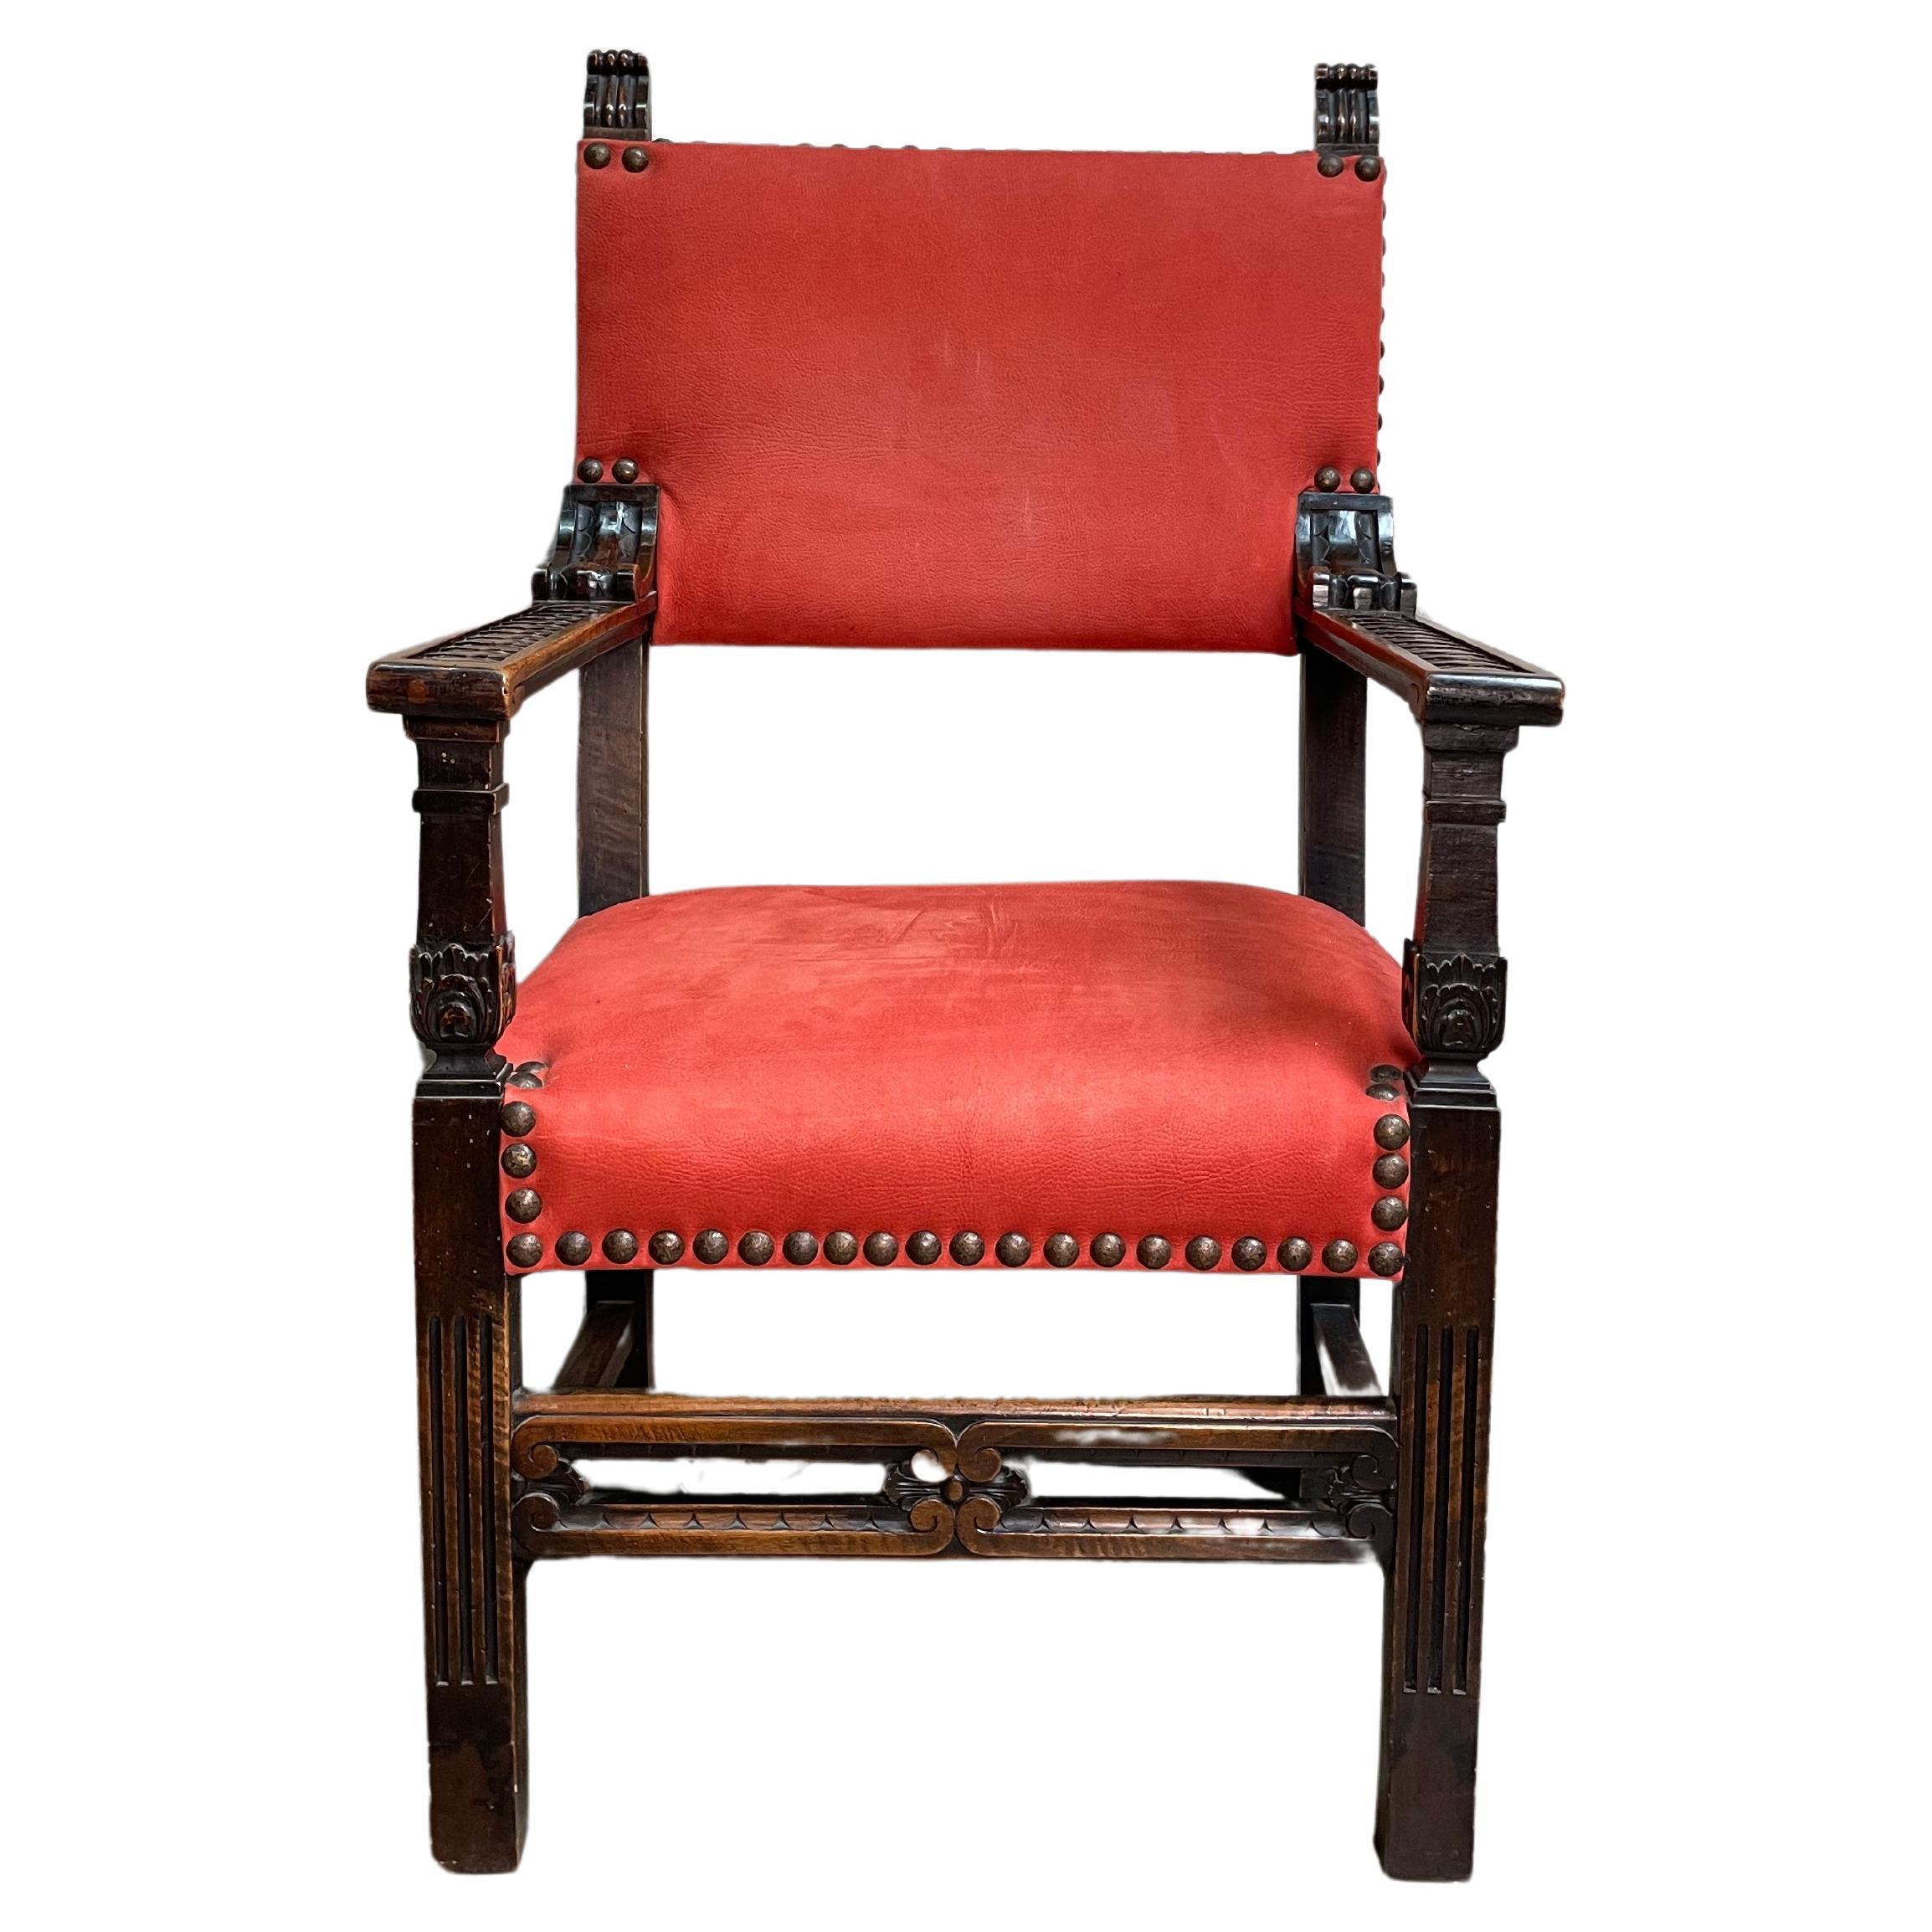 19th Century Italian Red Leather Chair For Sale